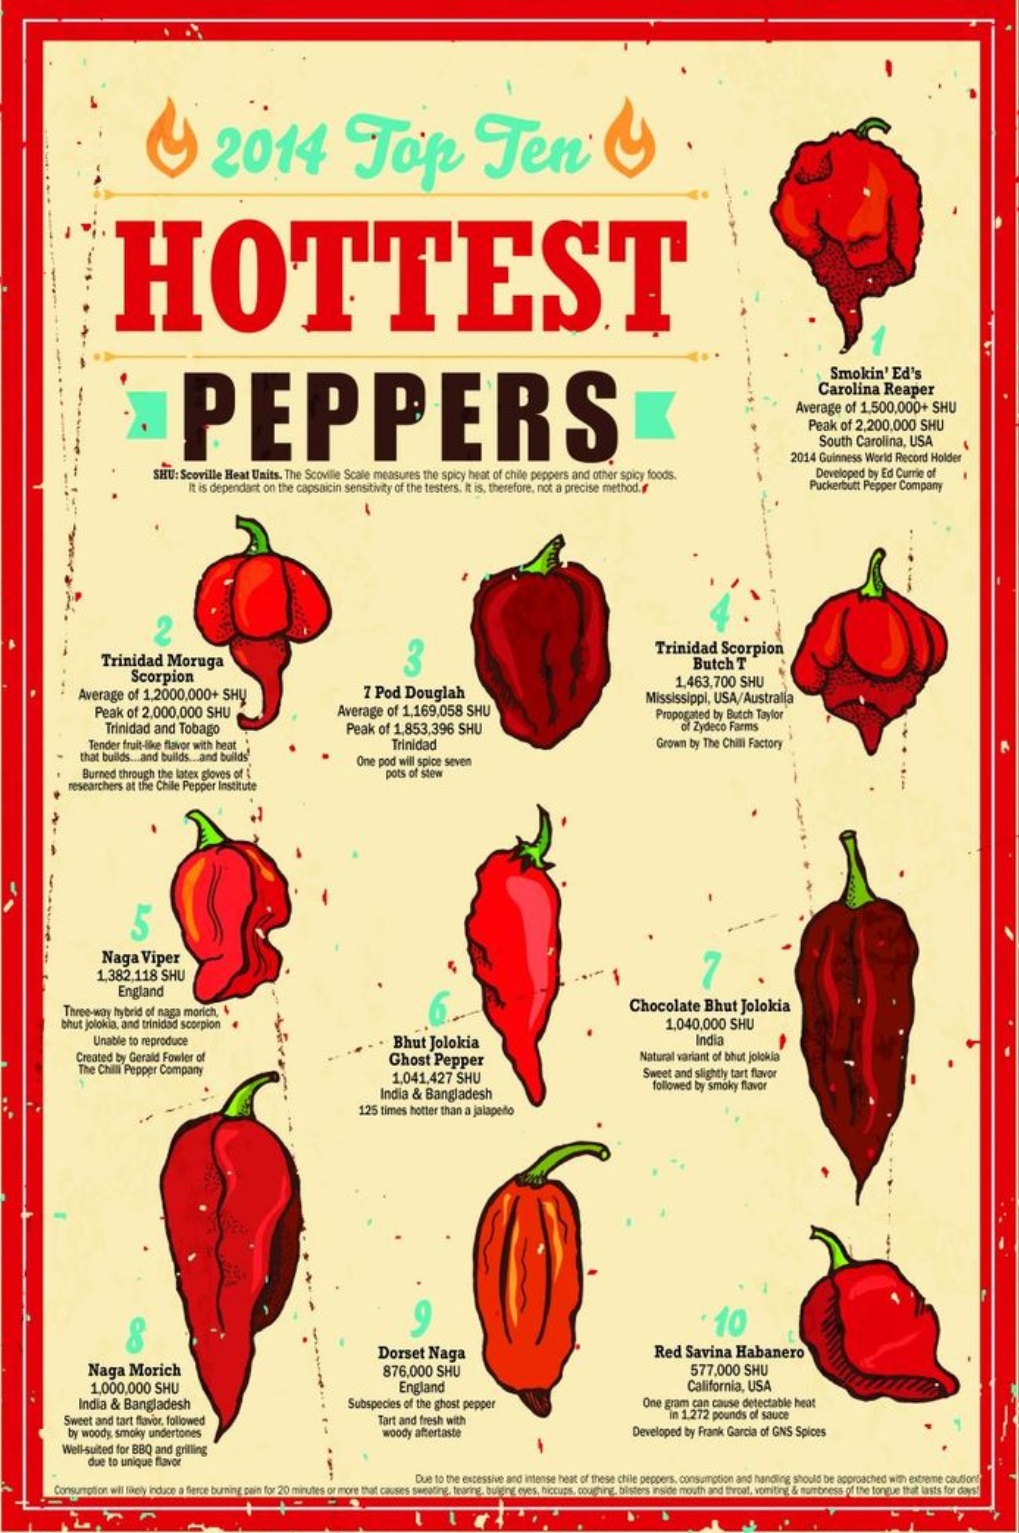 Top 10 hottest peppers